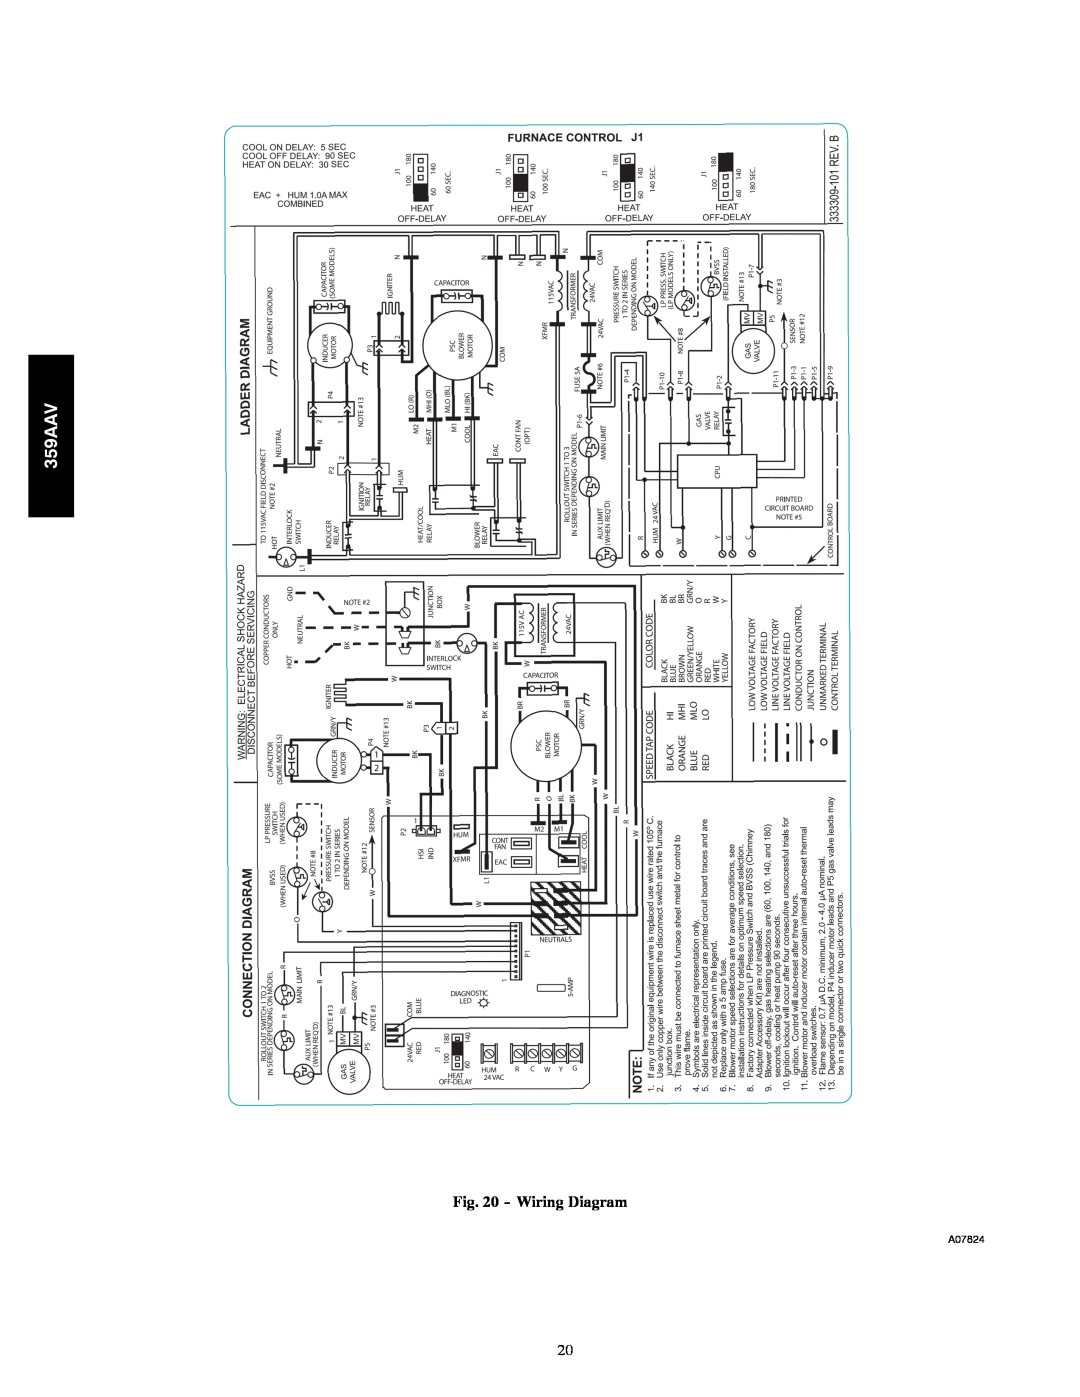 Bryant 359AAV instruction manual Wiring Diagram, A07824 